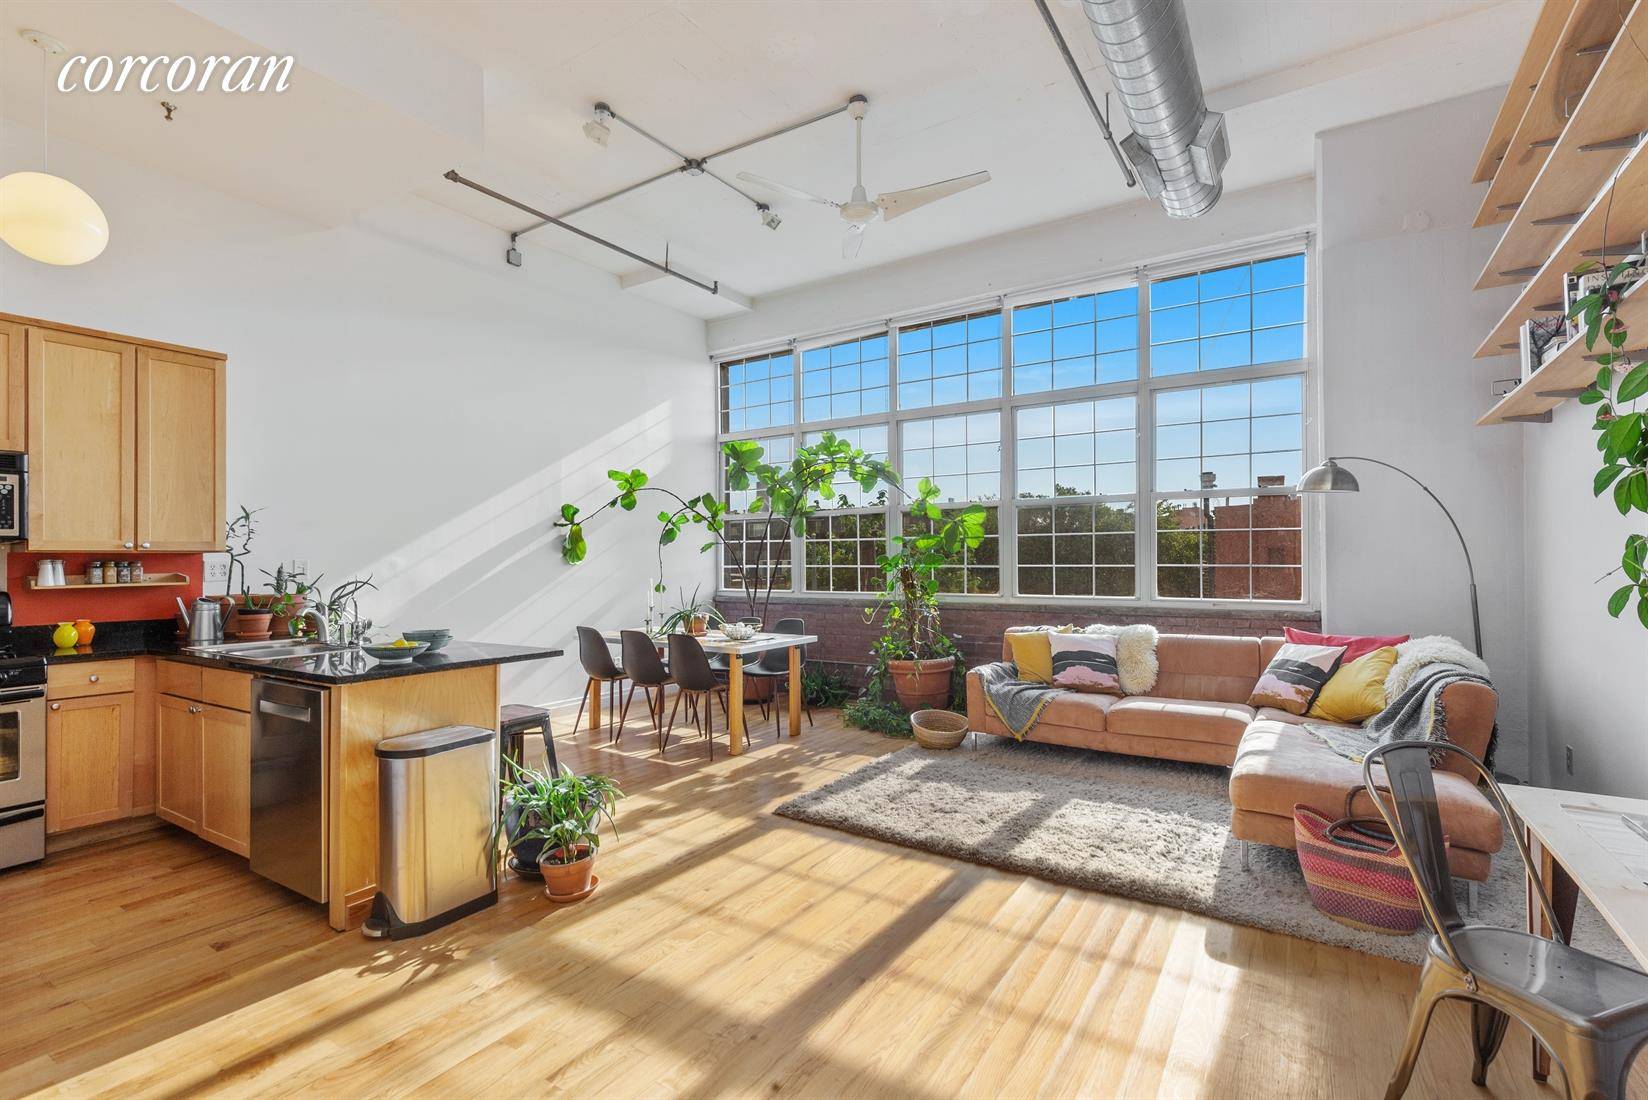 Imagine the plants you could grow if you had 140 square feet of windows and the morning sun beaming in to your quintessential New York loft apartment !